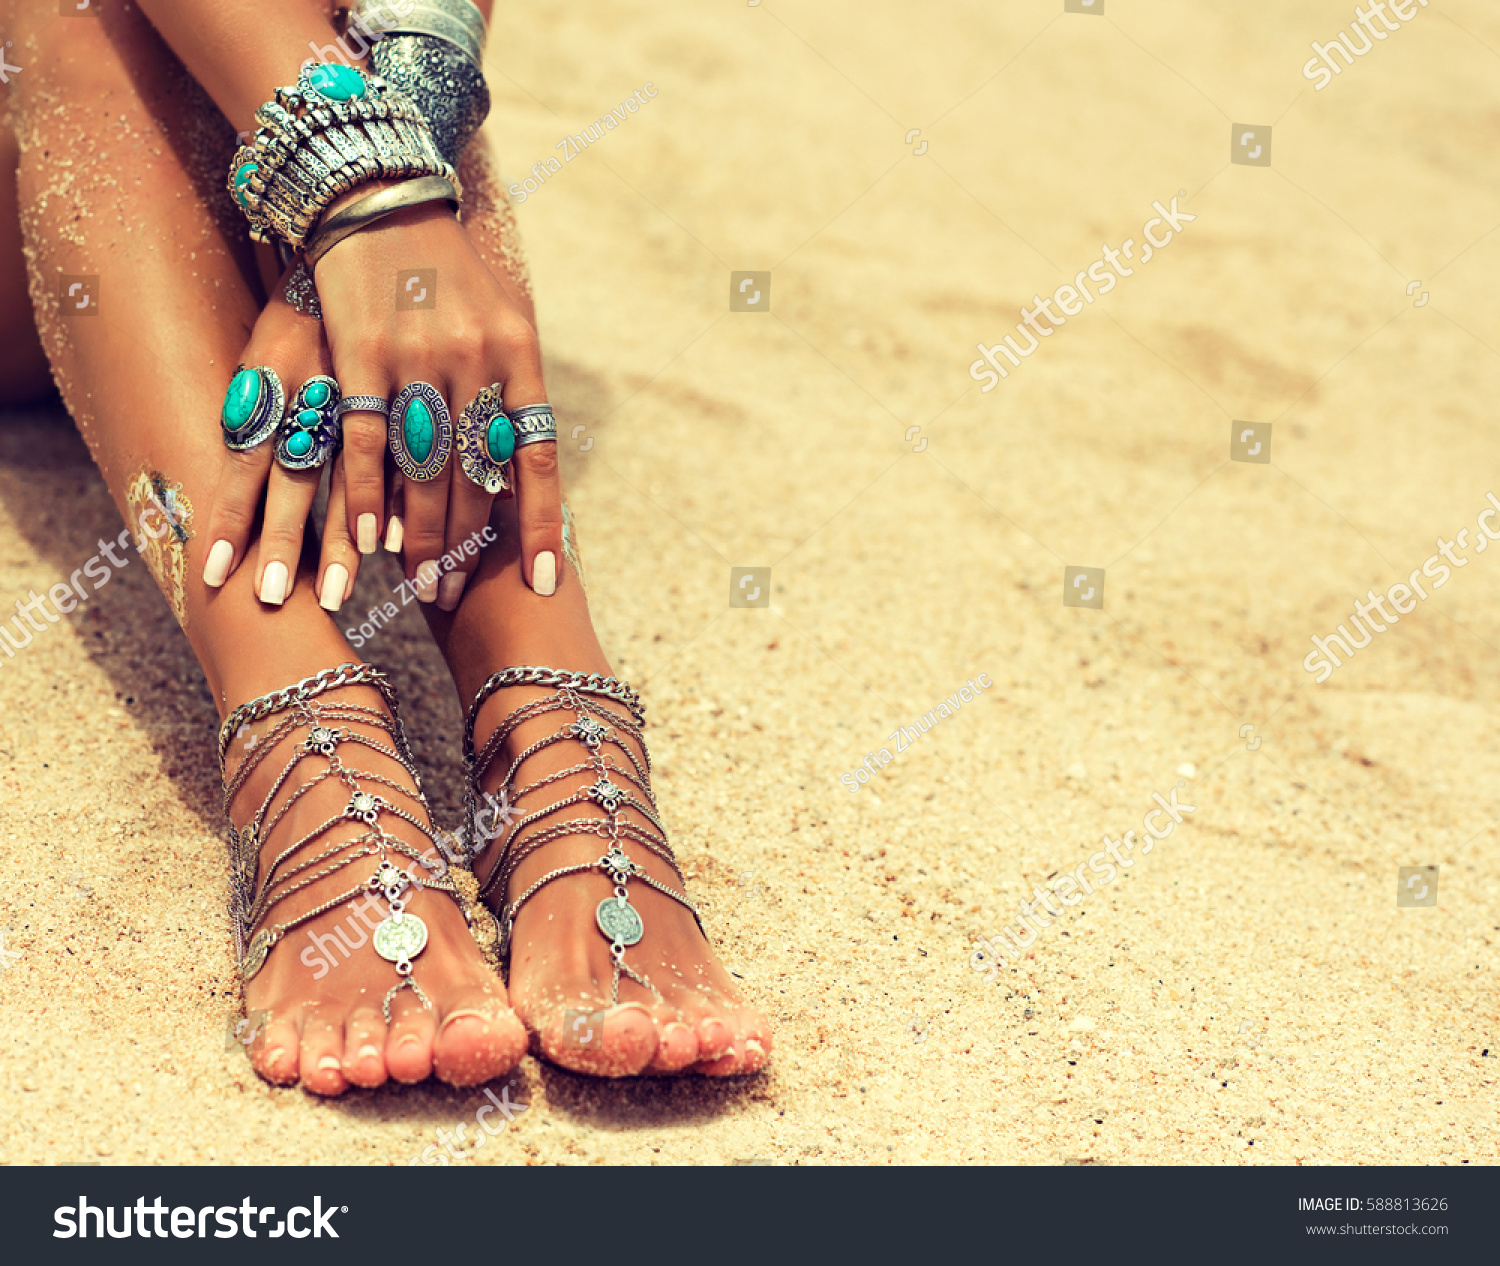 Woman In Relaxation On Tropical Beach with sand , body parts  . Tanned girl in Lotus position with silver jewelry,bracelets and rings with turquoise.Boho style #588813626